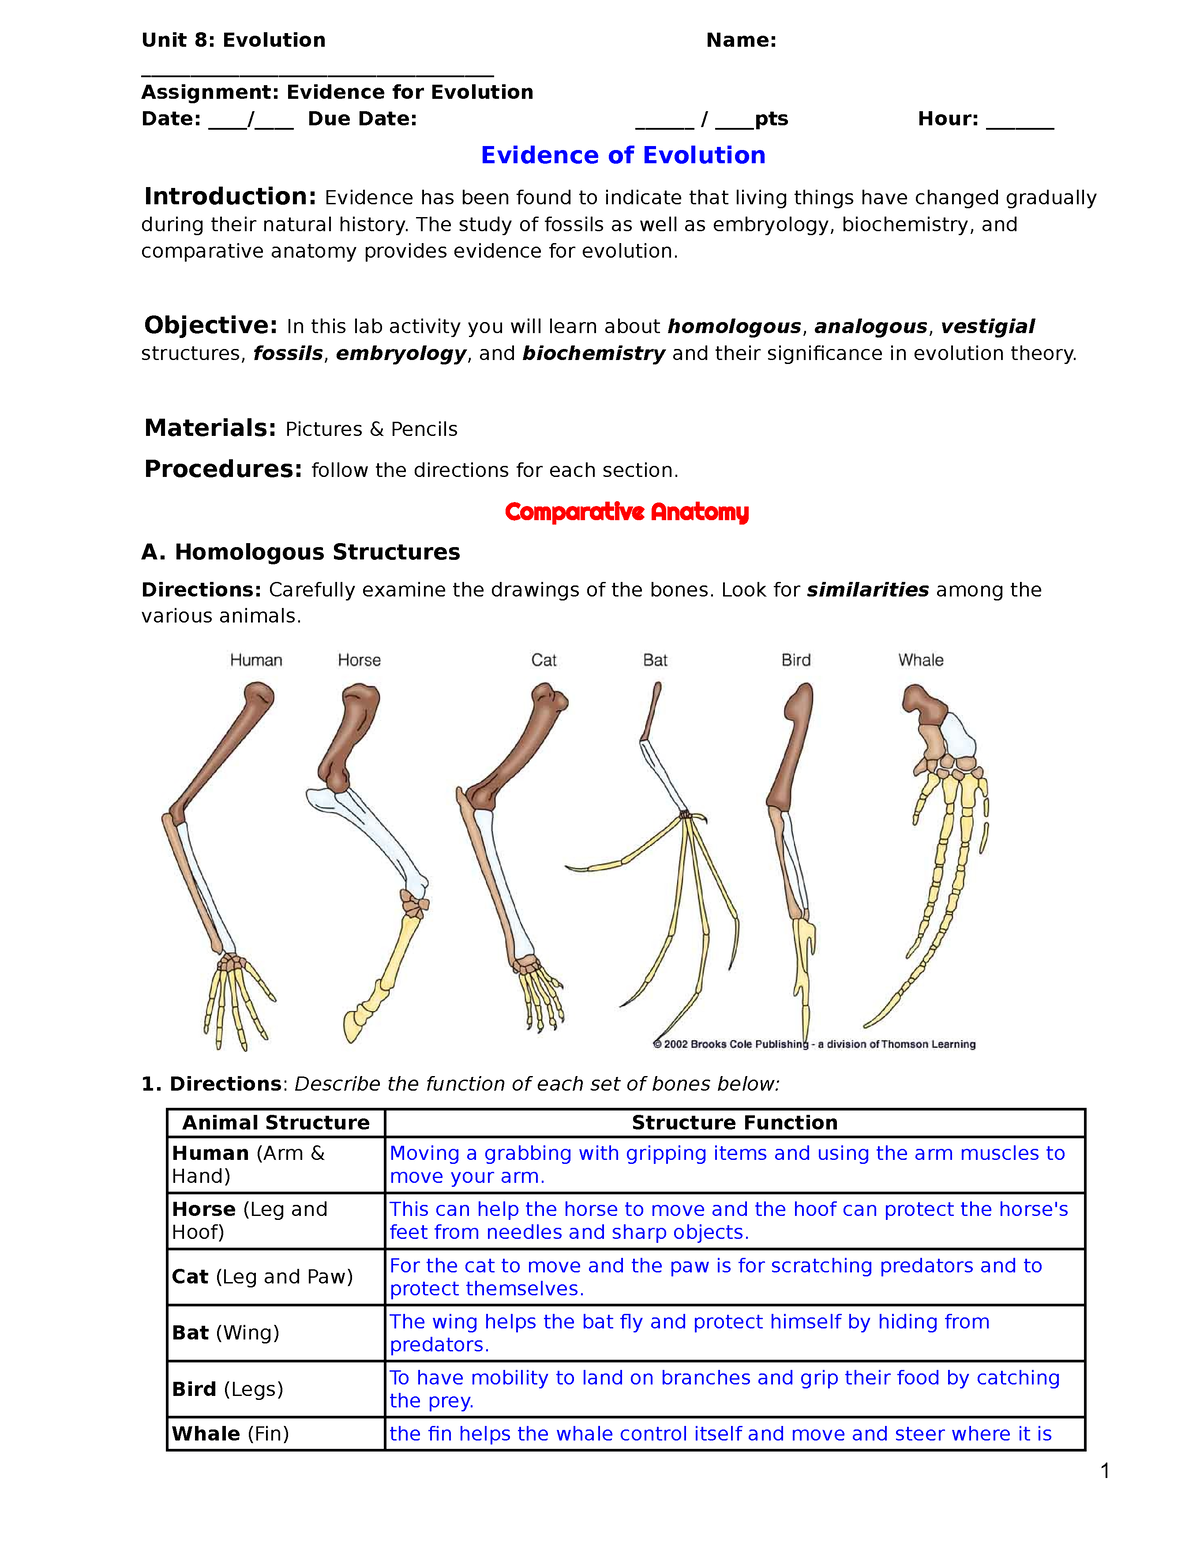 copy-of-evidence-of-evolution-assignment-evidence-for